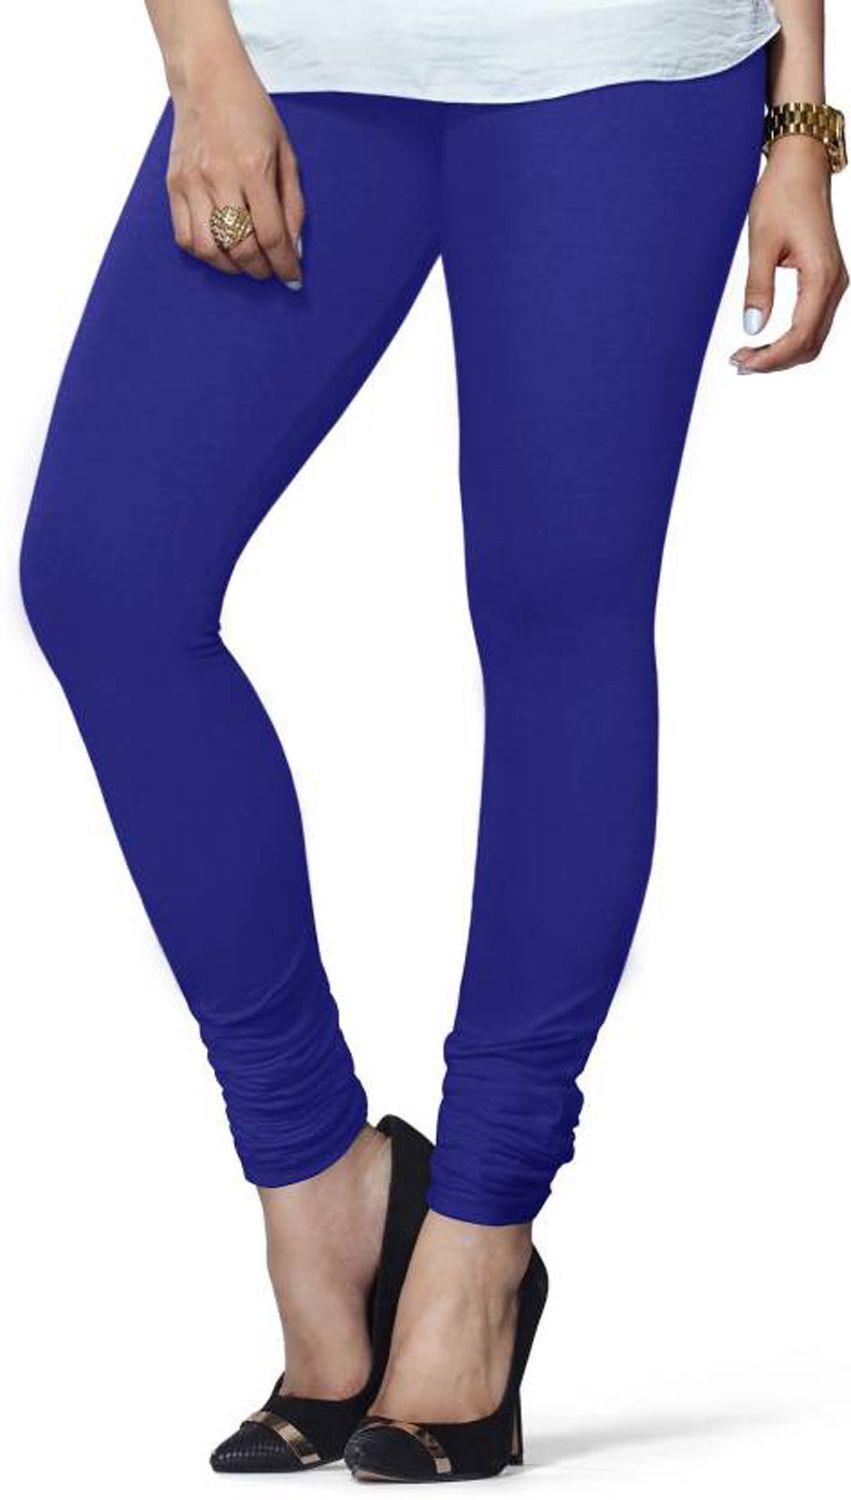 Evited Comfortable Cotton Laggings For Woman - Buy Evited Comfortable ...